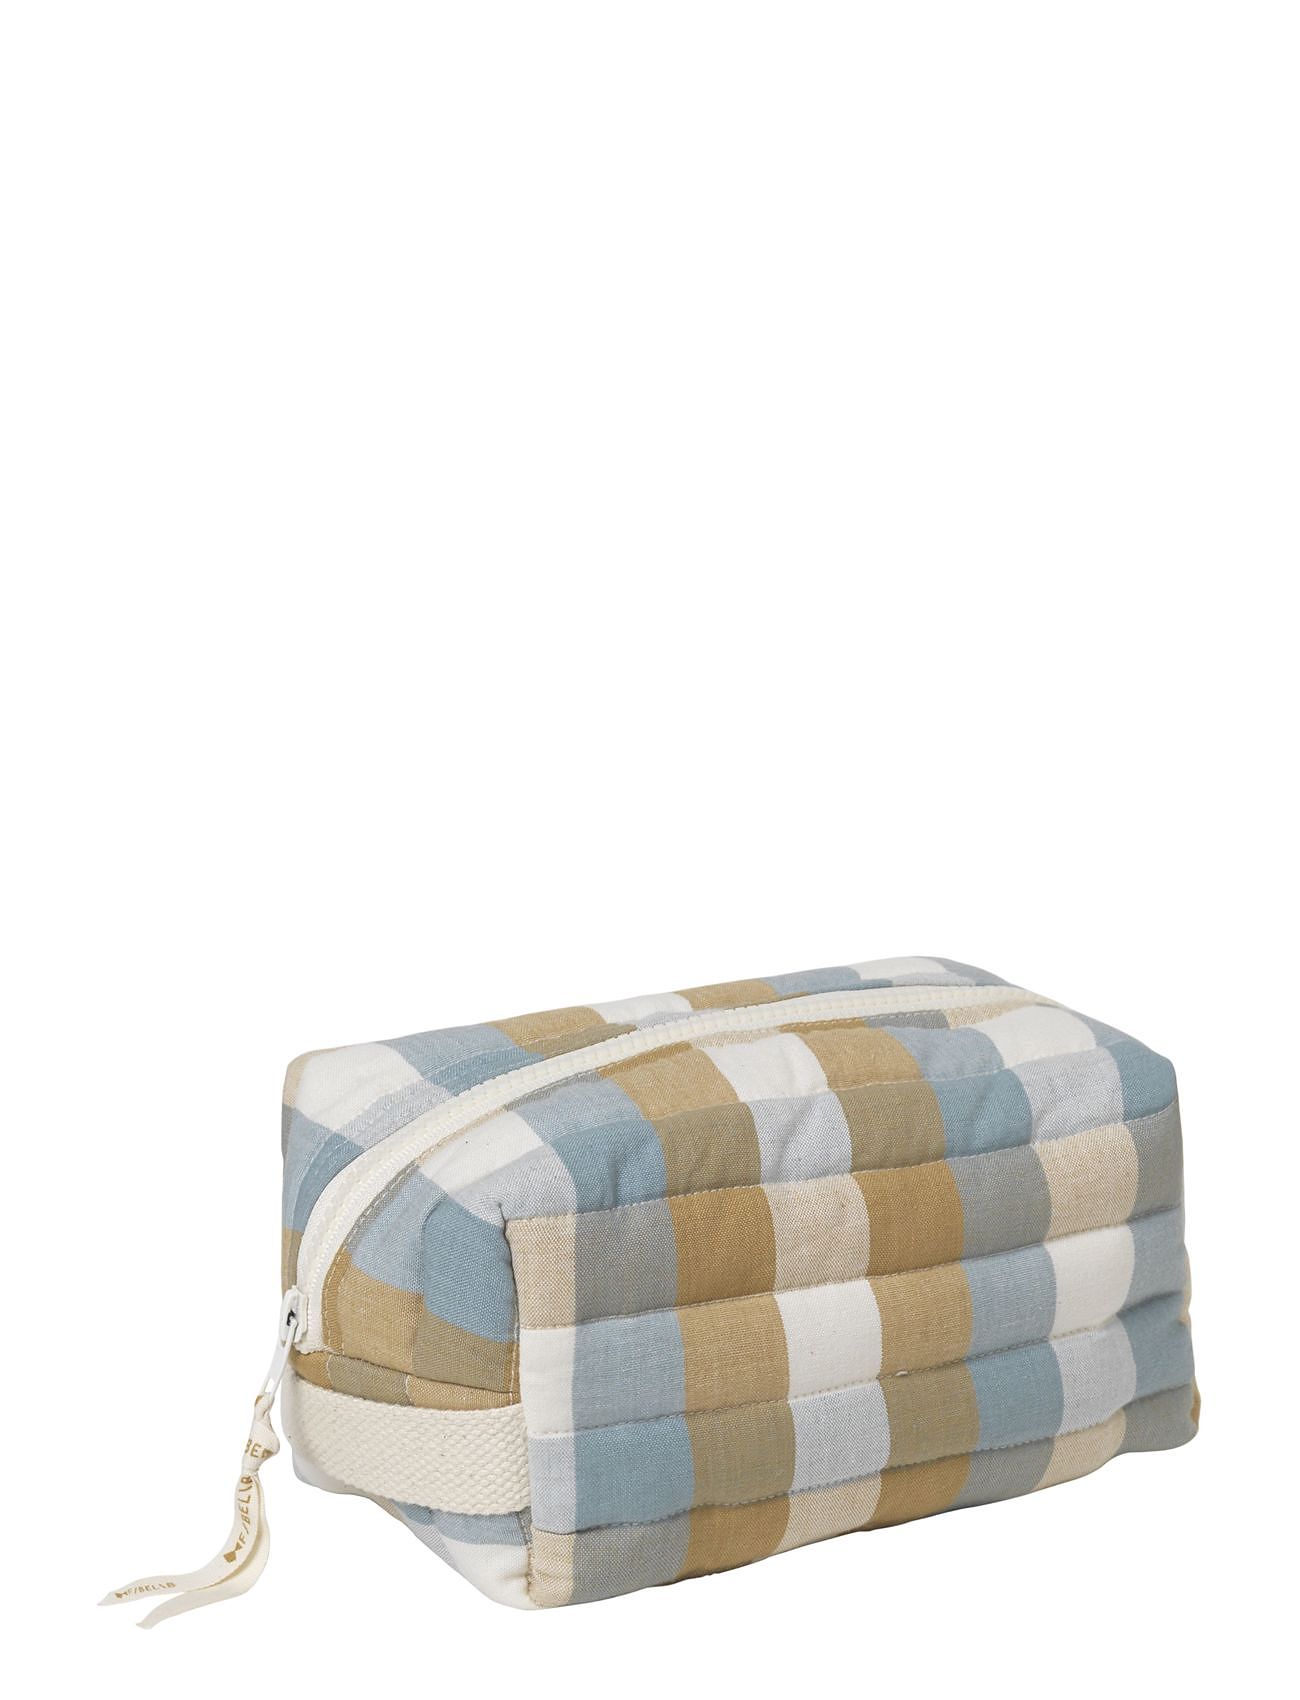 Quilted Toiletry Bag - Cottage Blue Checks Accessories Bags Toiletry Bag Multi/patterned Fabelab